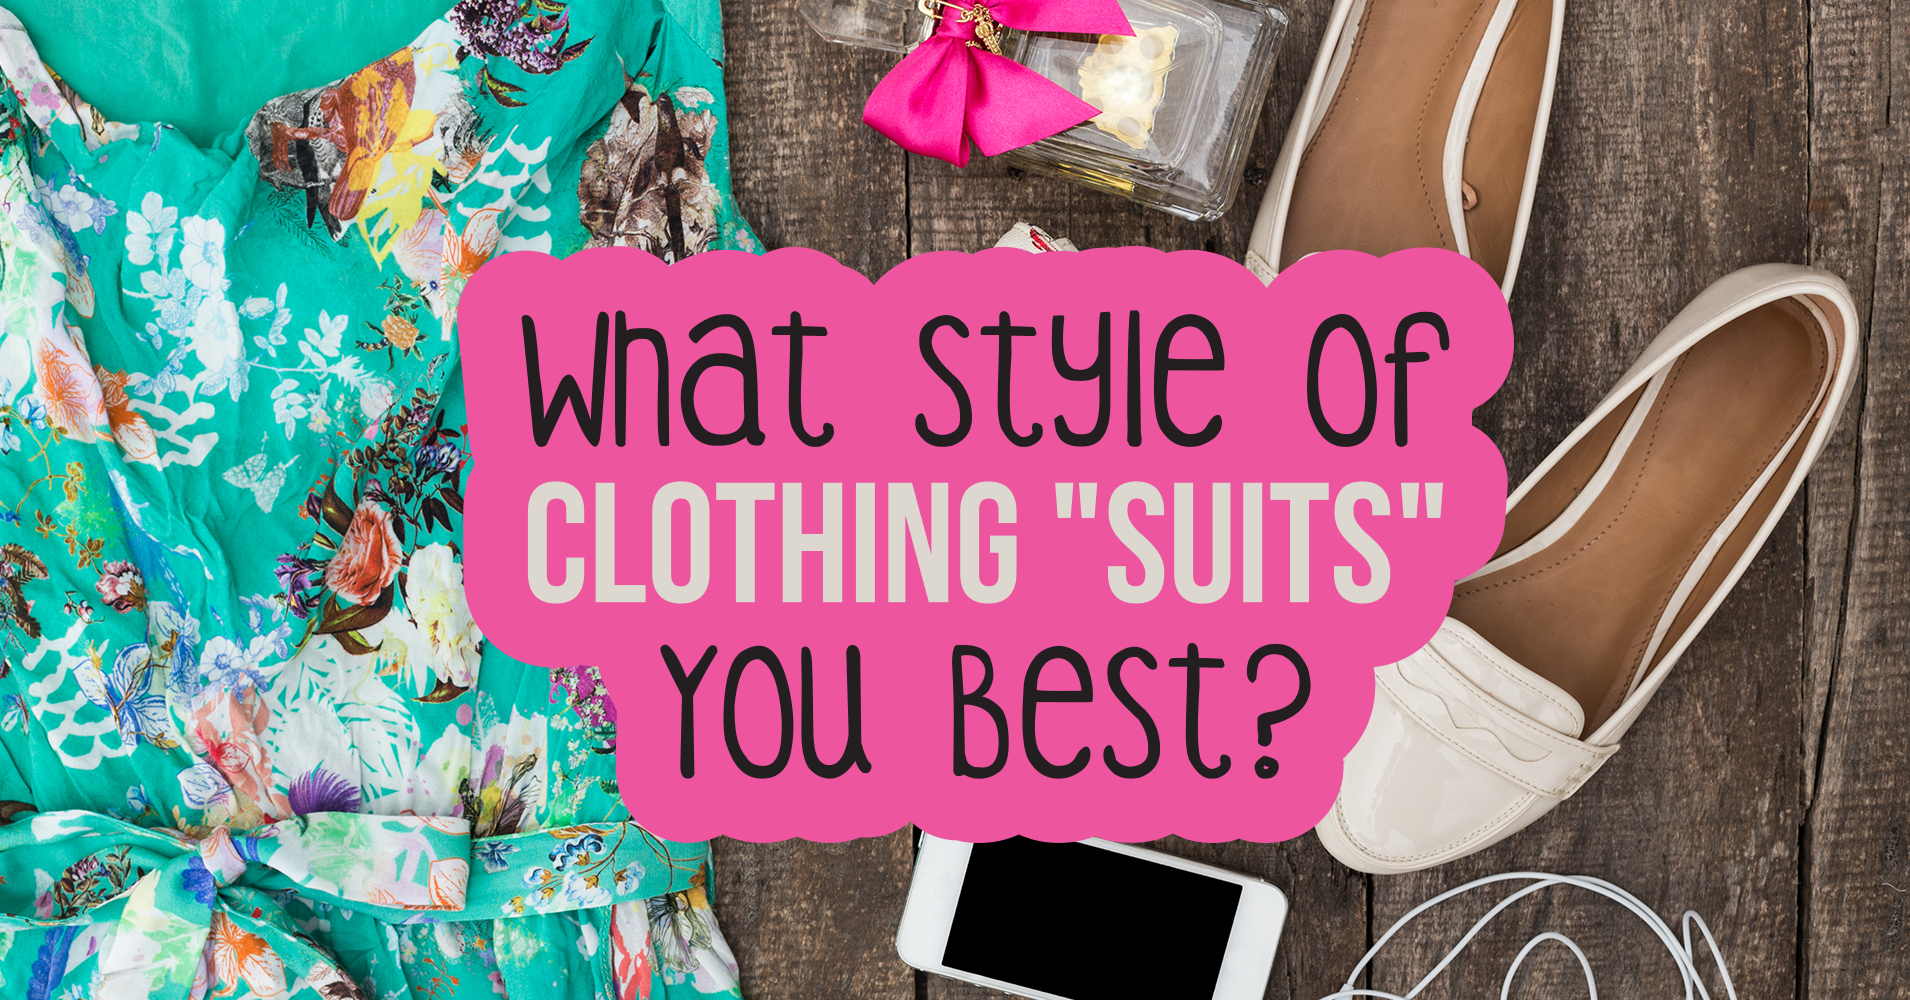 What Style Of Clothing Suits You Best